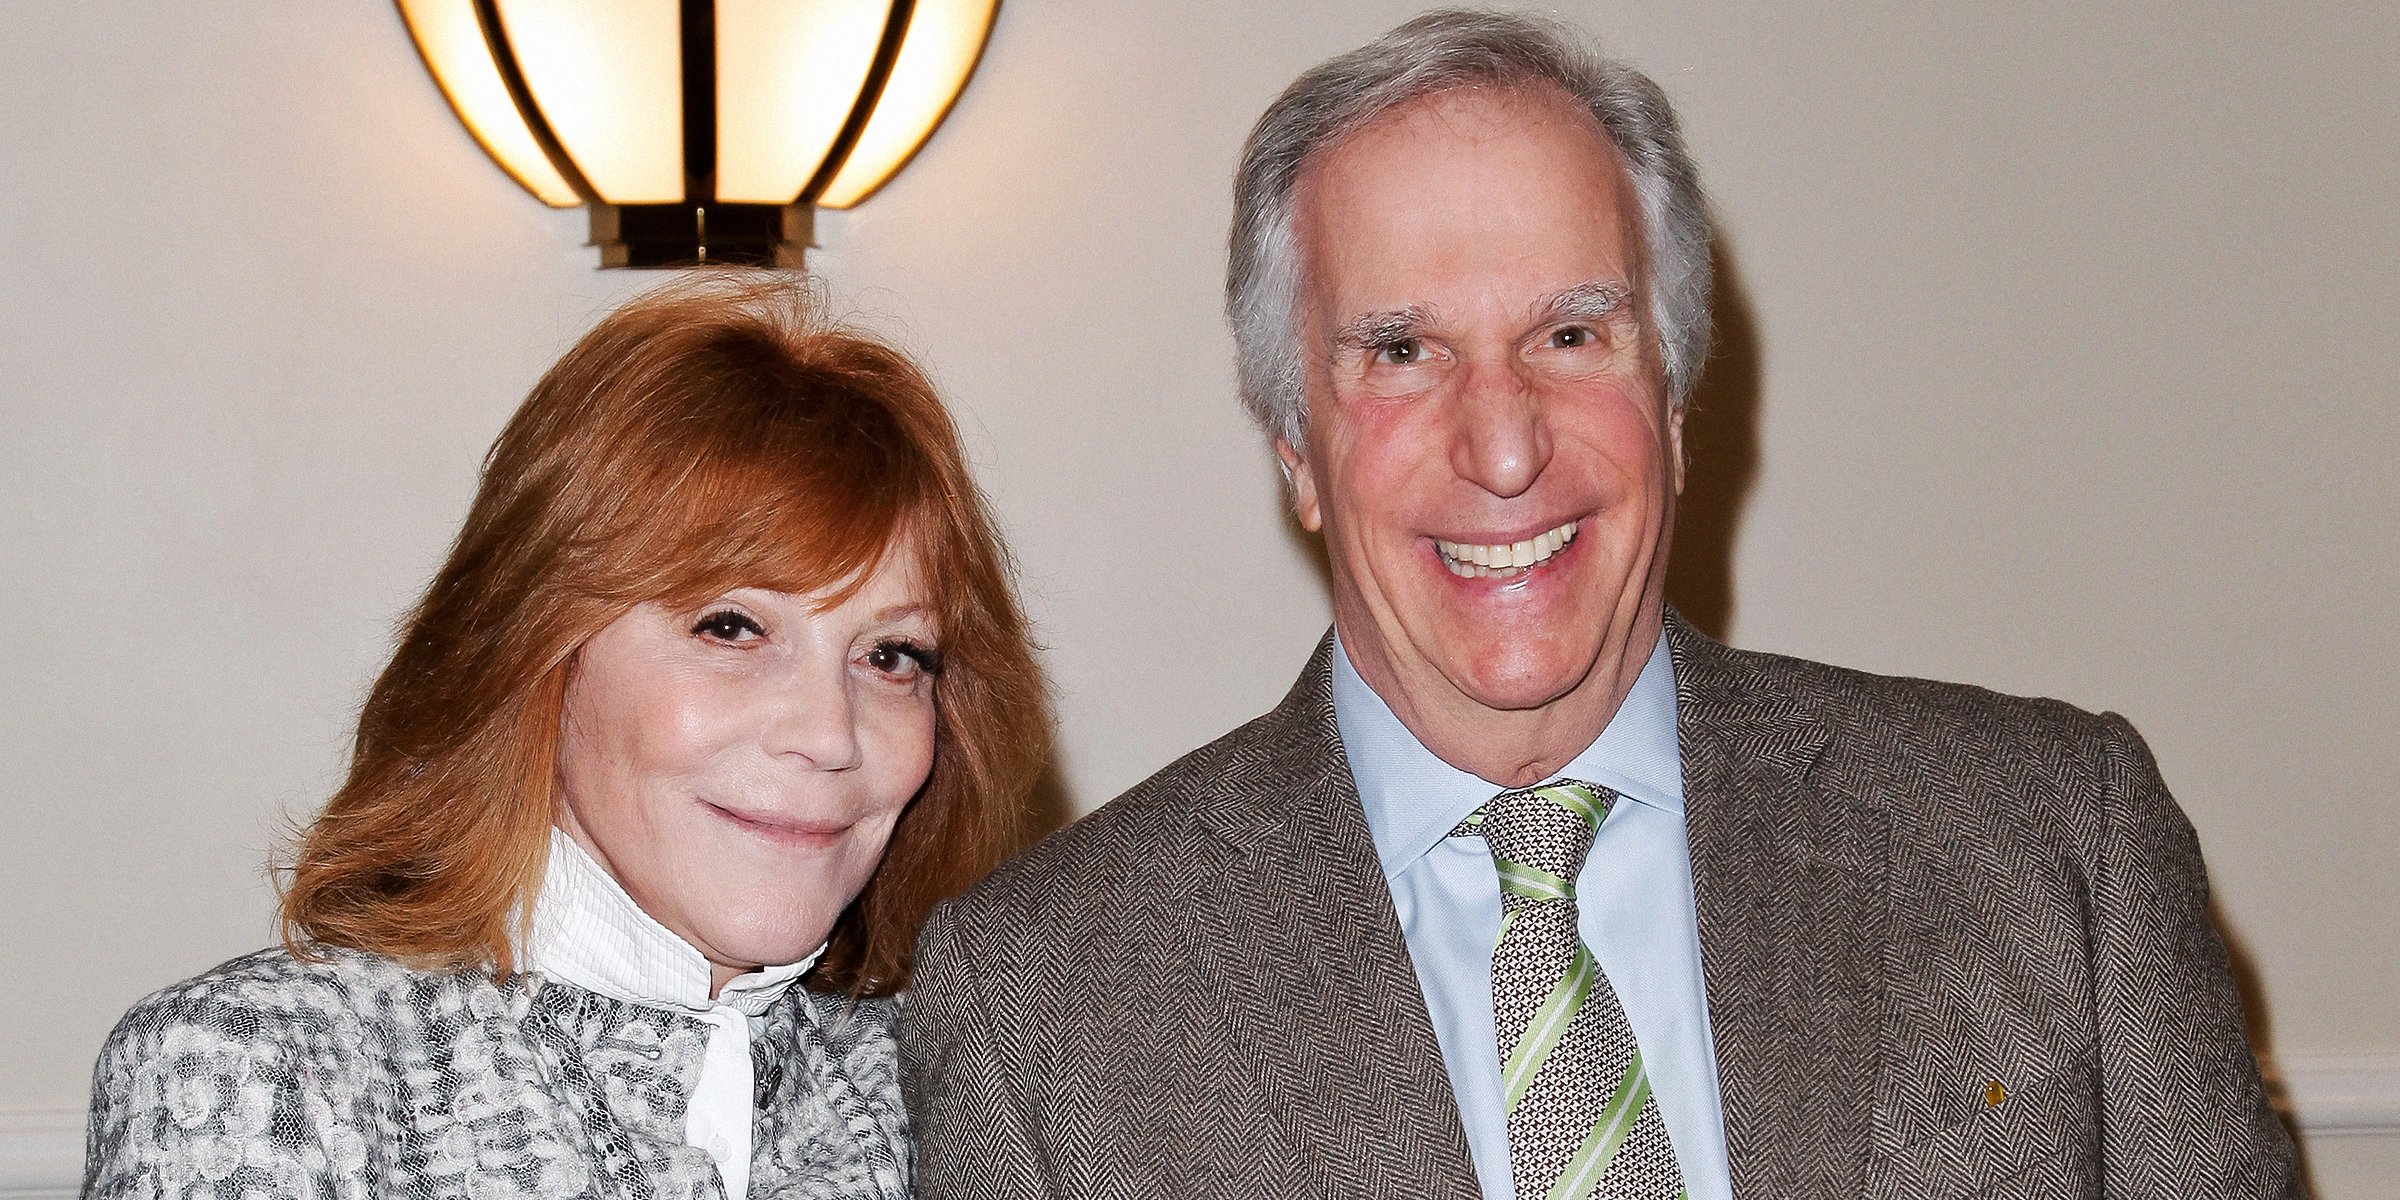 Stacey Winkler and Henry Winkler | Source: Getty Images